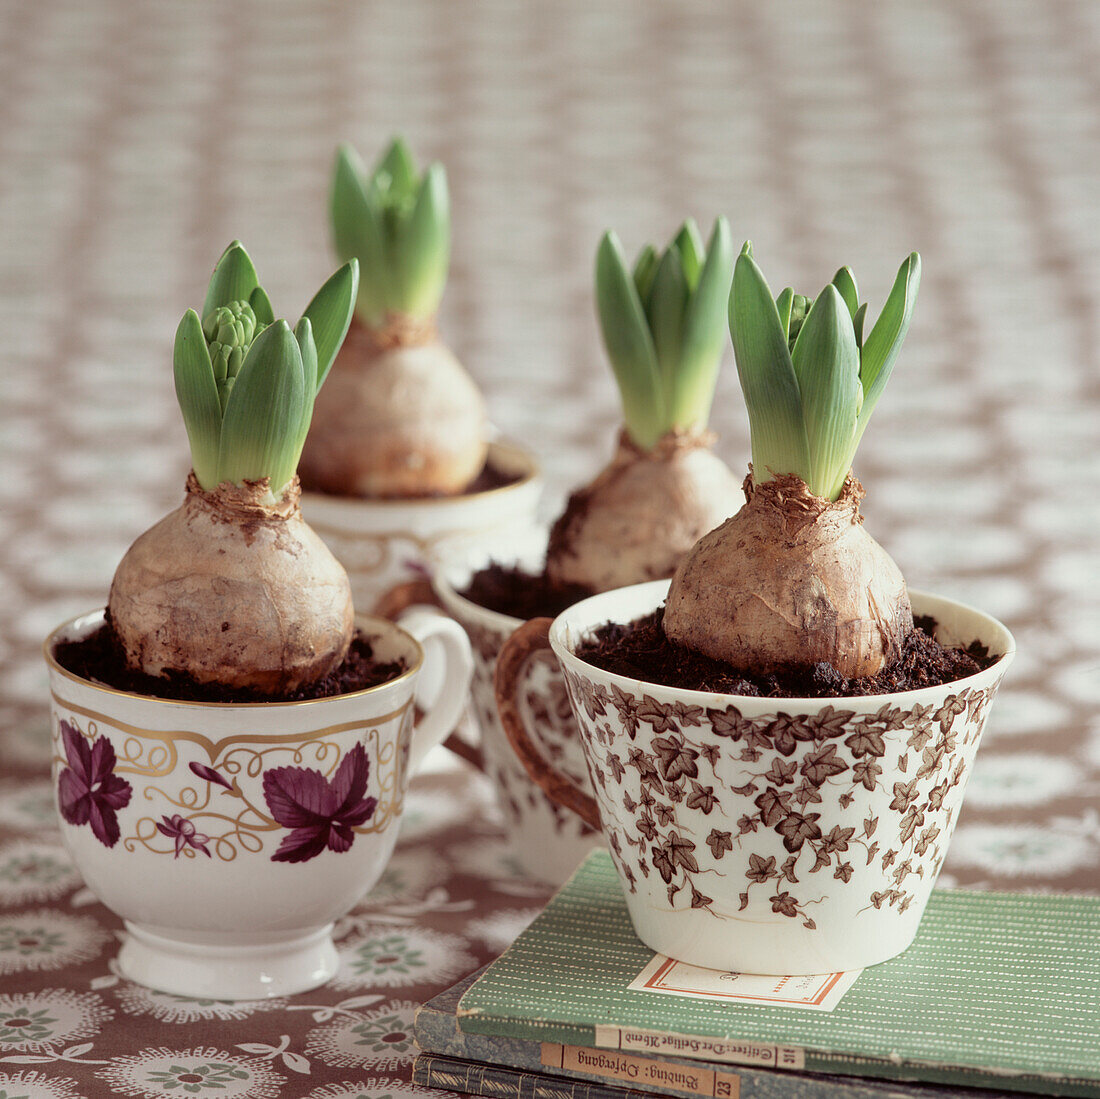 Four china tea cups with Hyacinth bulbs planted in them